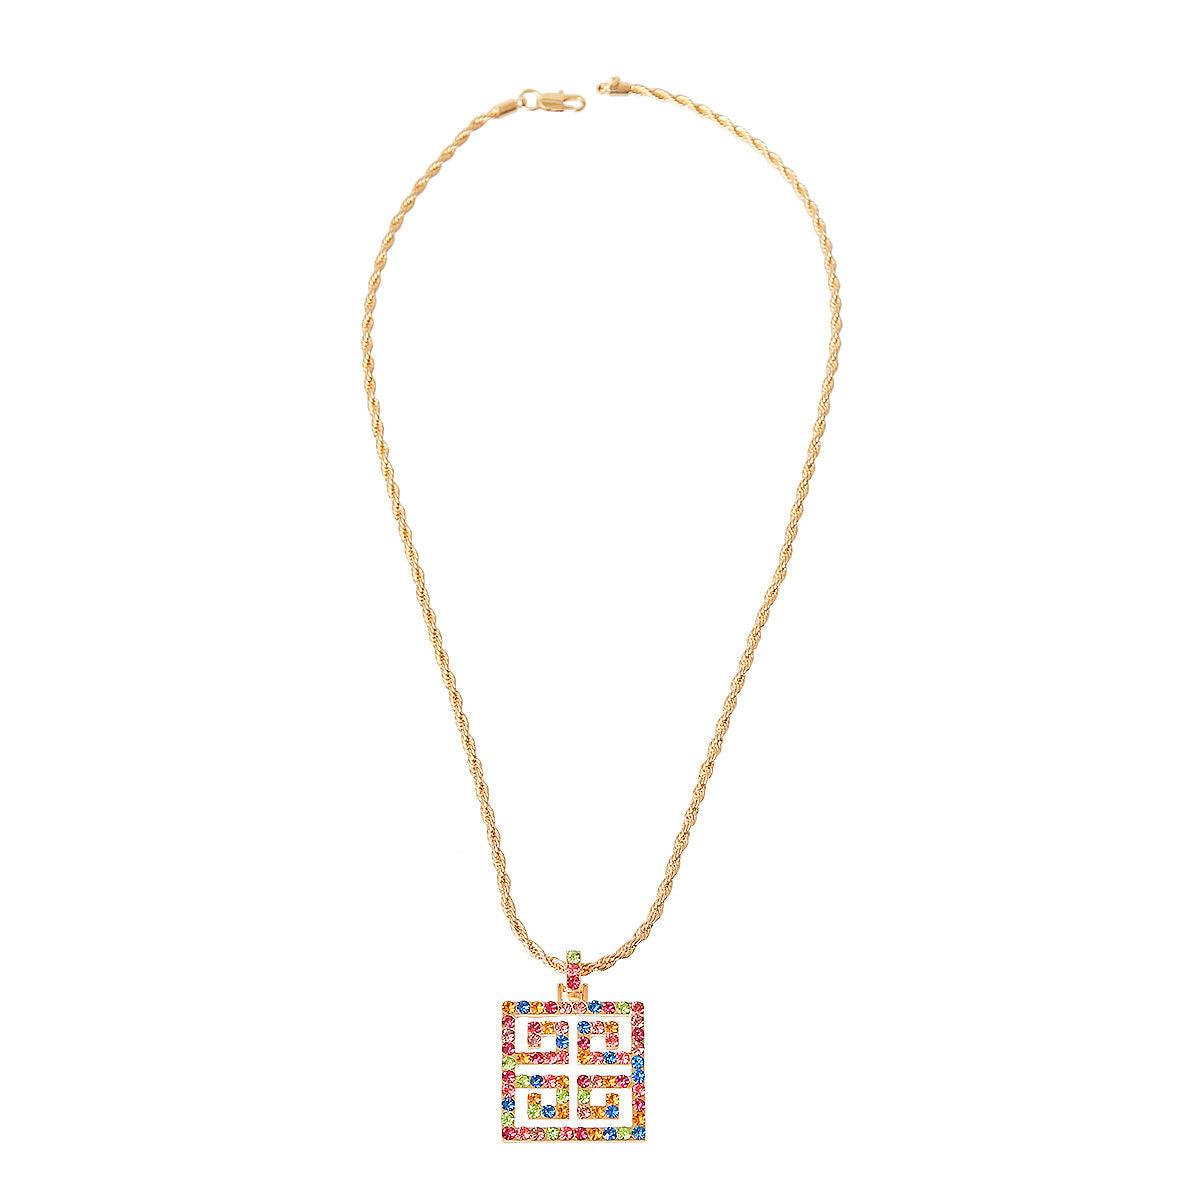 Multicolor Rhinestone Chain Necklace – Your Perfect Statement Piece